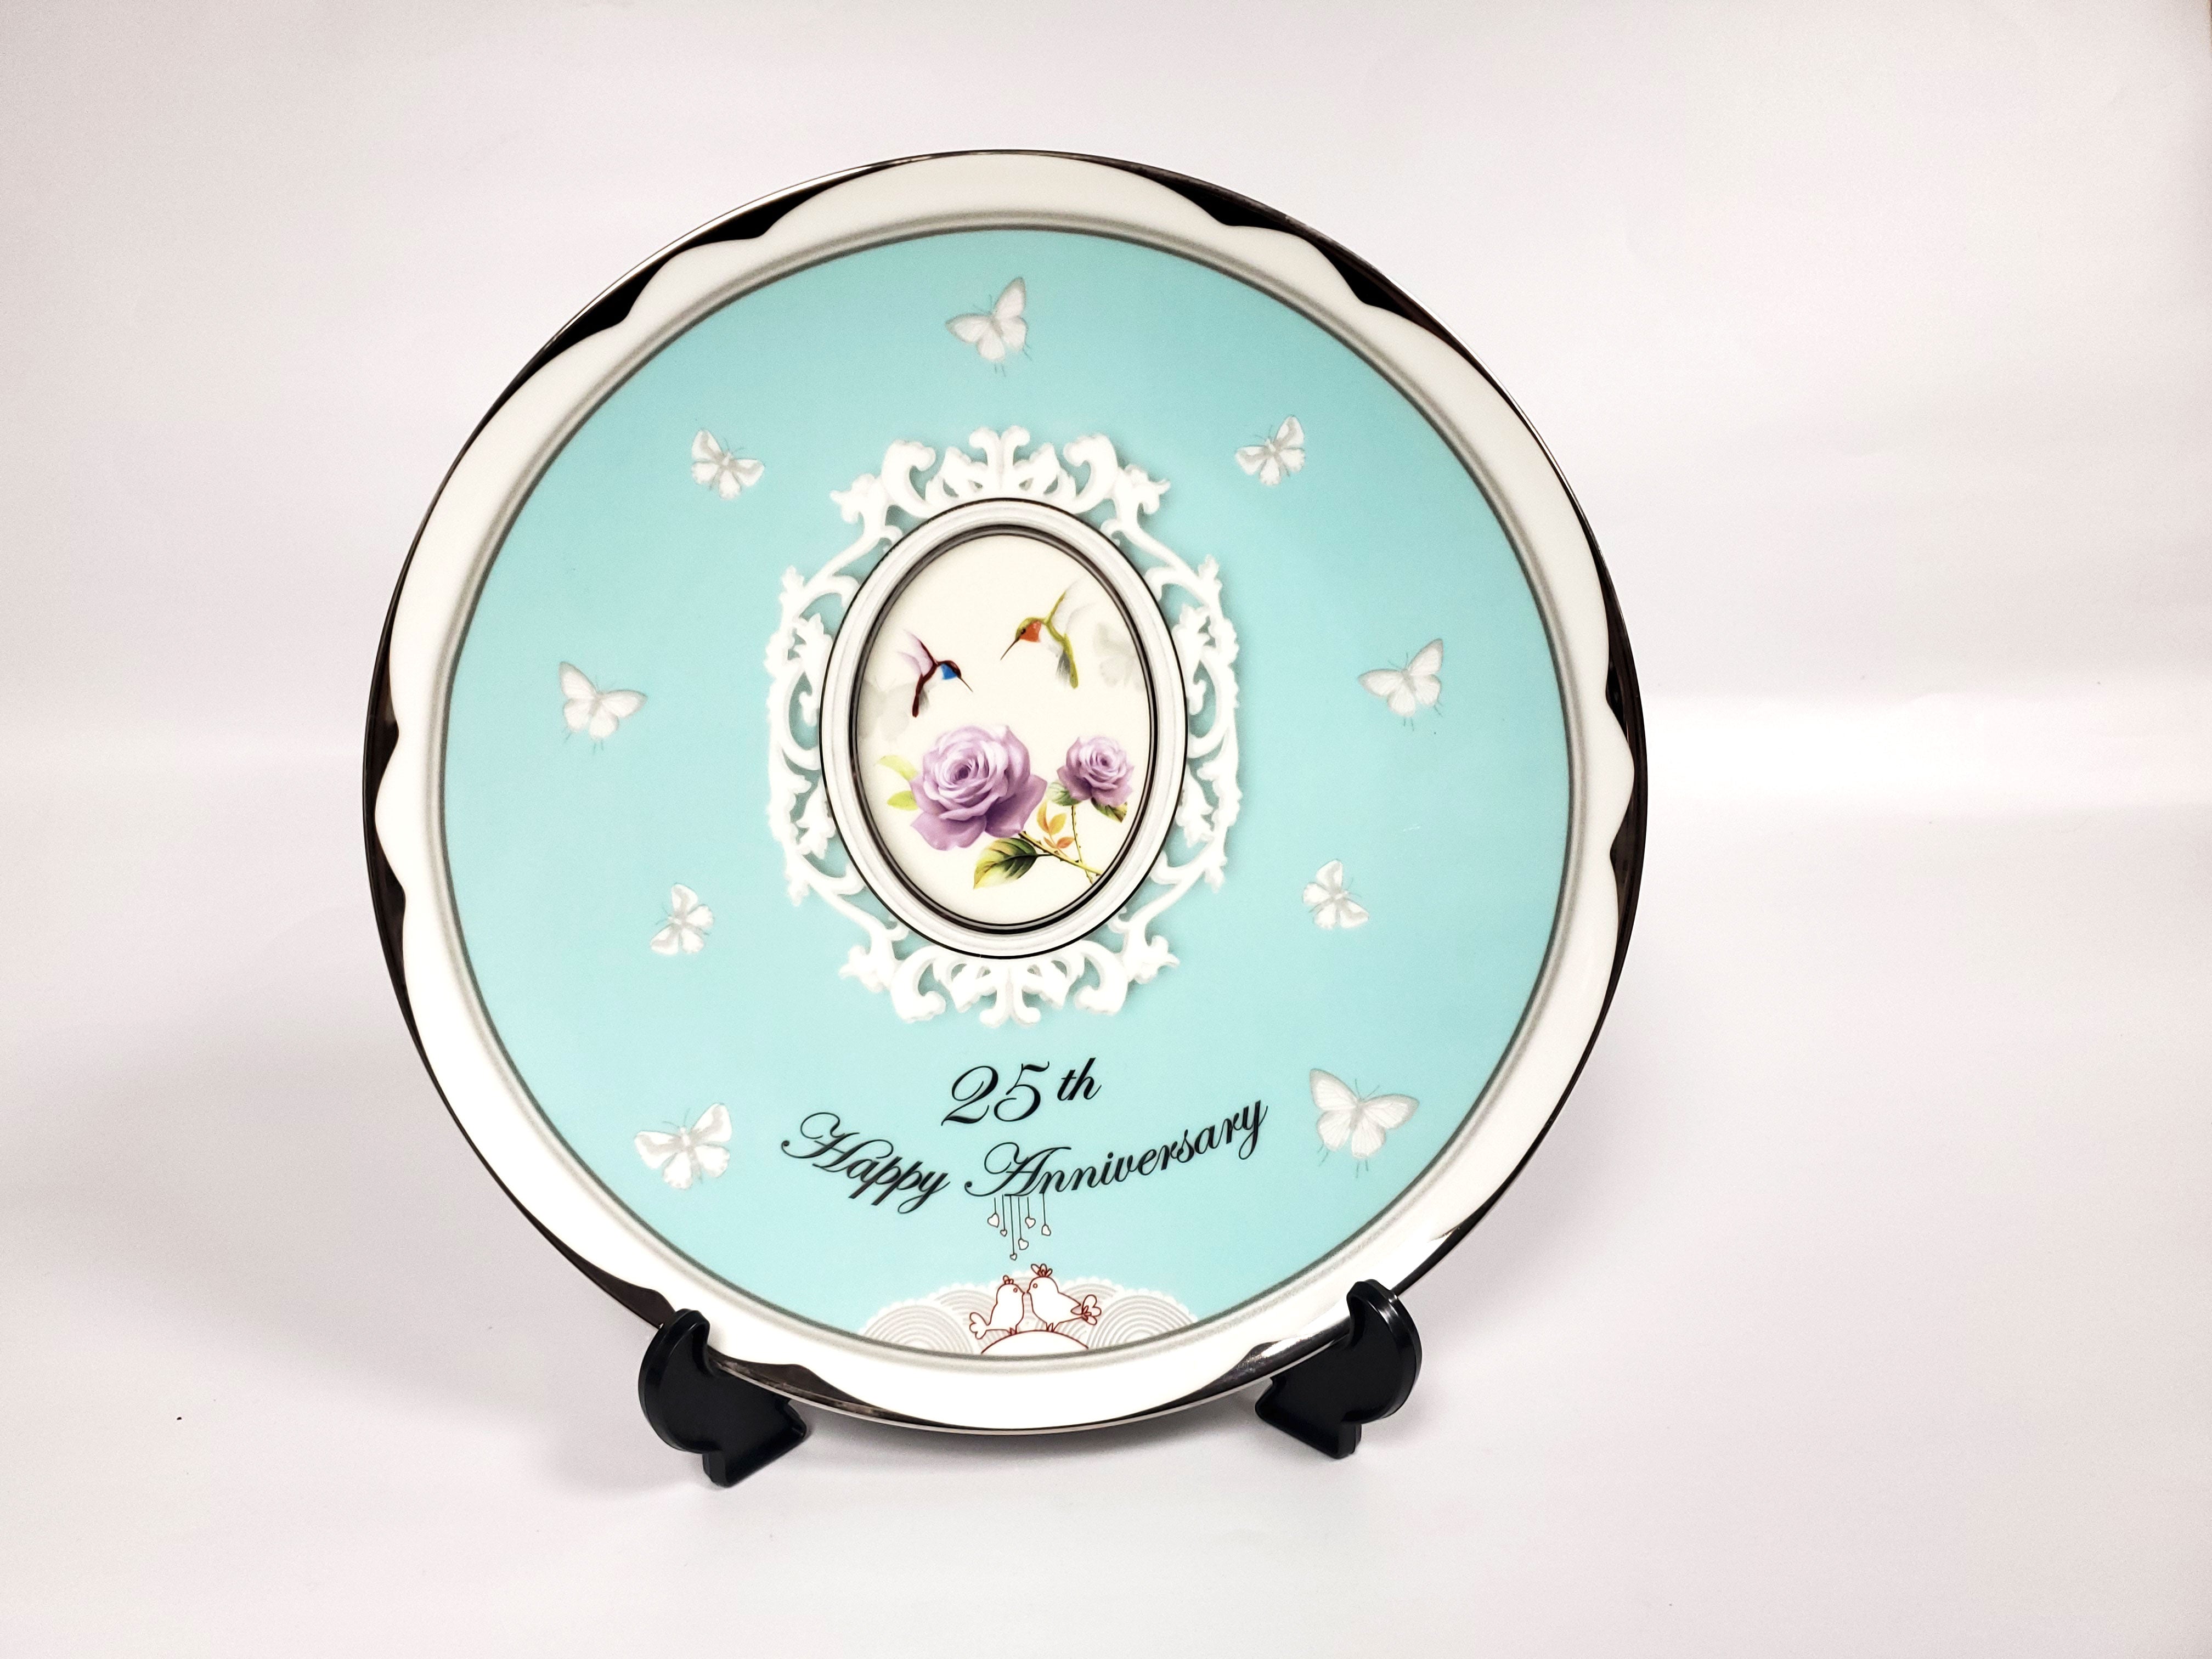 25th Anniversary Plate 12" Porcelain fine bone china gift boxed - Royal Gift